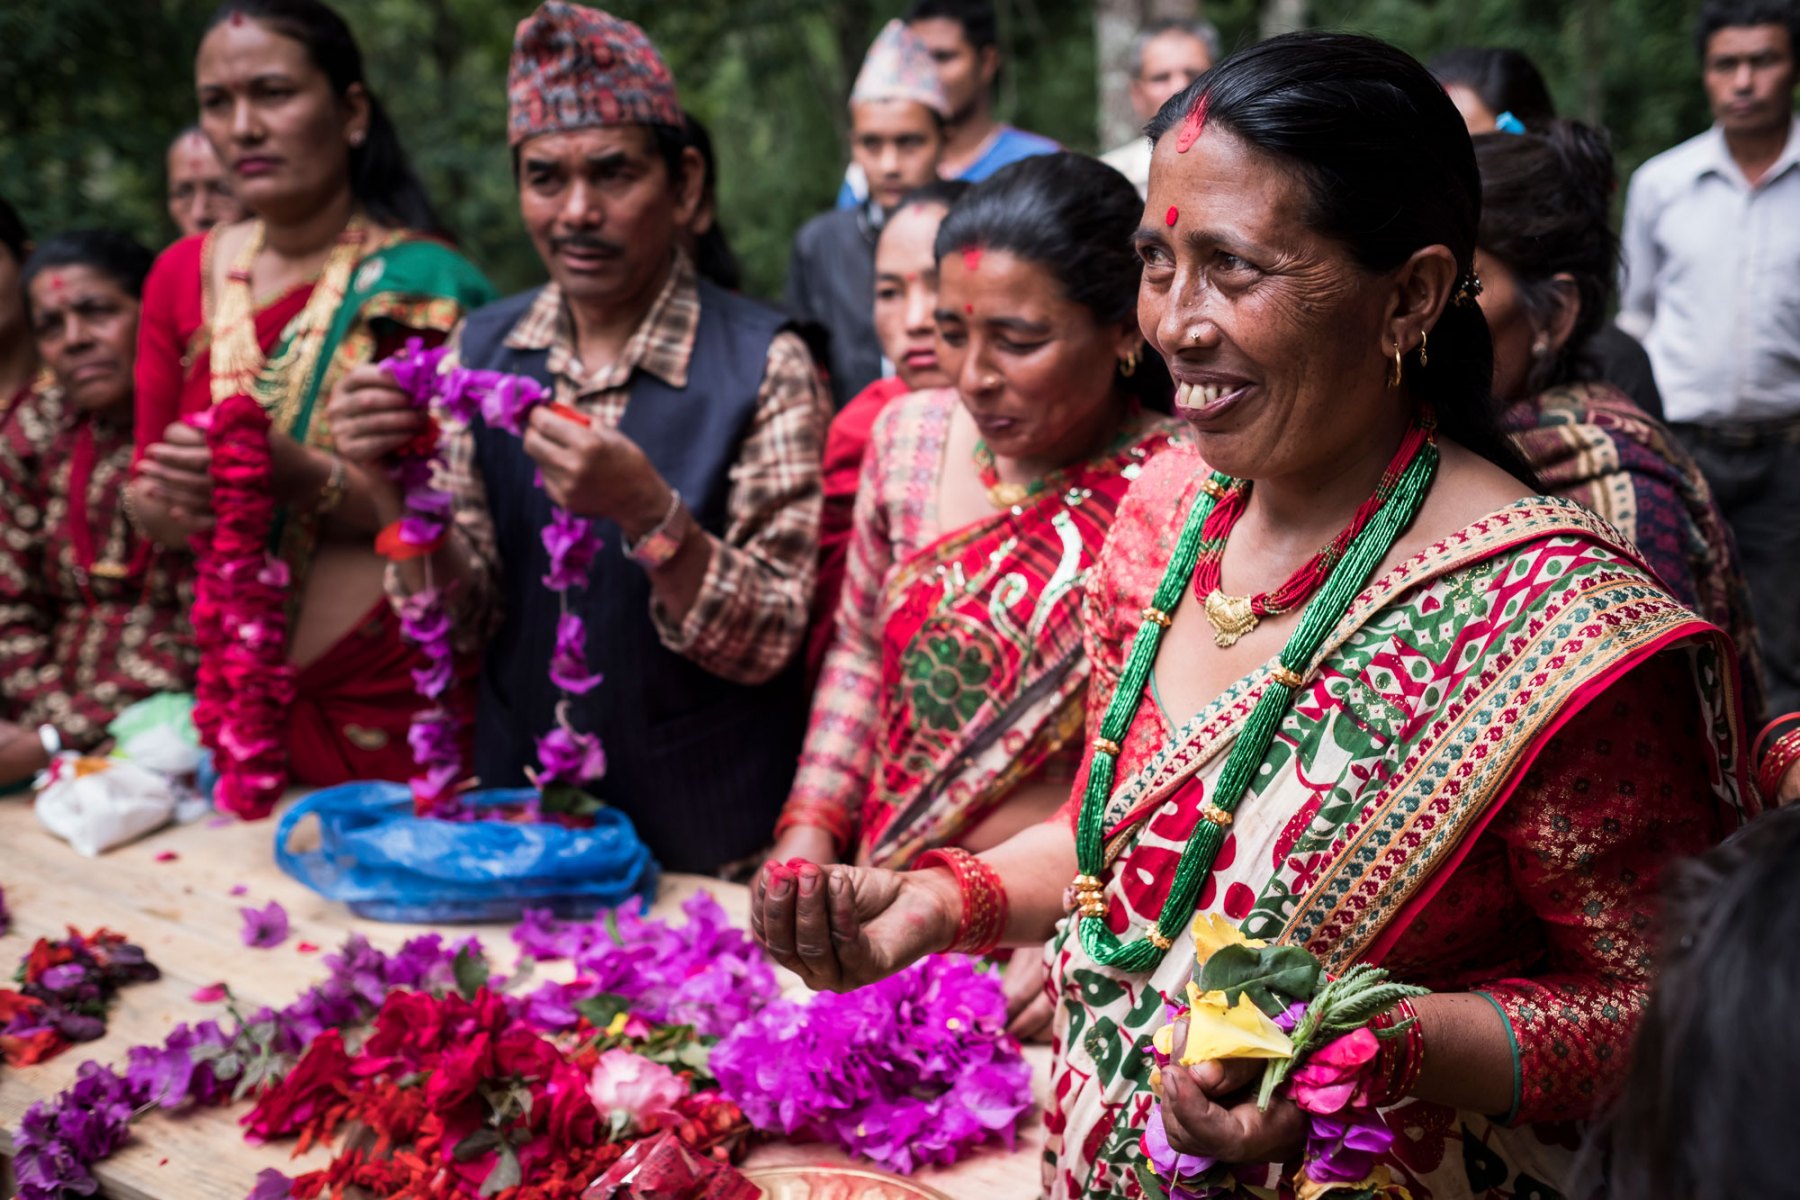 Members of the Chaubas Community Forest Users Group wait with garlands to greet members visiting with the Crawford Fund and Landline group. The group is predominantly made up of women and they are highly engaged in the silvicultural management of community forests and have been farming cardamom in Fagar Khola community forest for the past two years. Cardamom is a high value crop that requires little maintenance once it's been planted and leads to additional income for the female farmers.